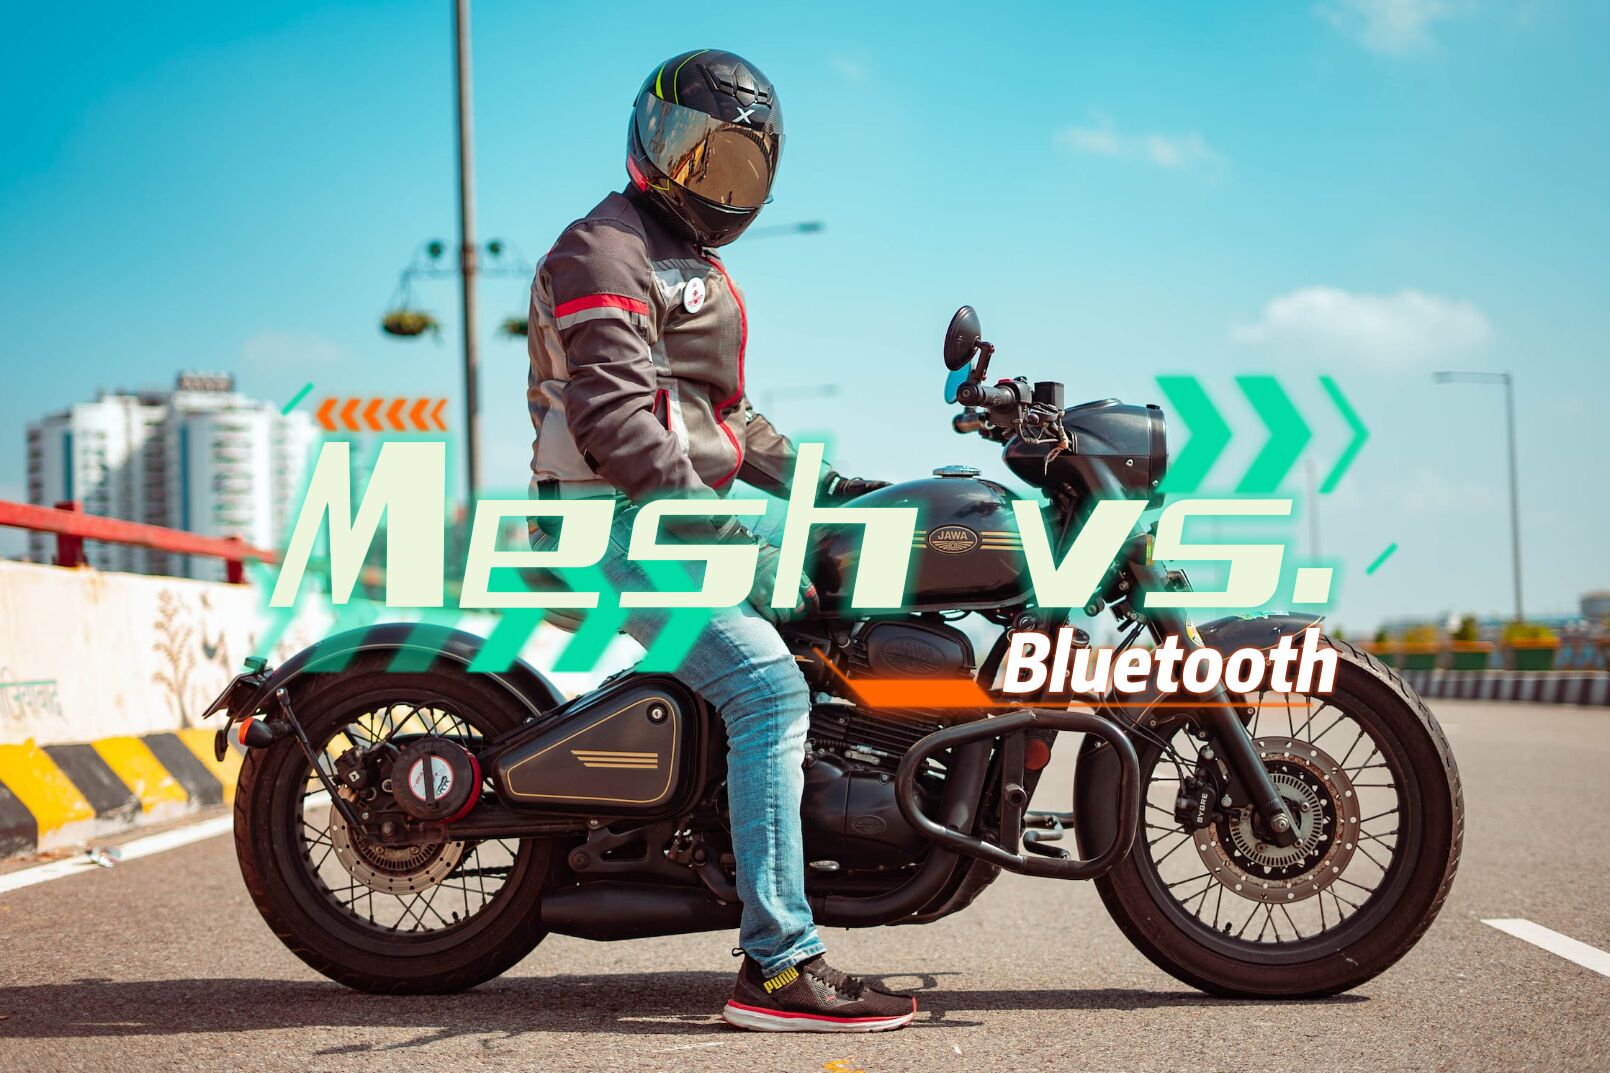 Motorcycle Mesh Intercom vs. Bluetooth: Which is Better?